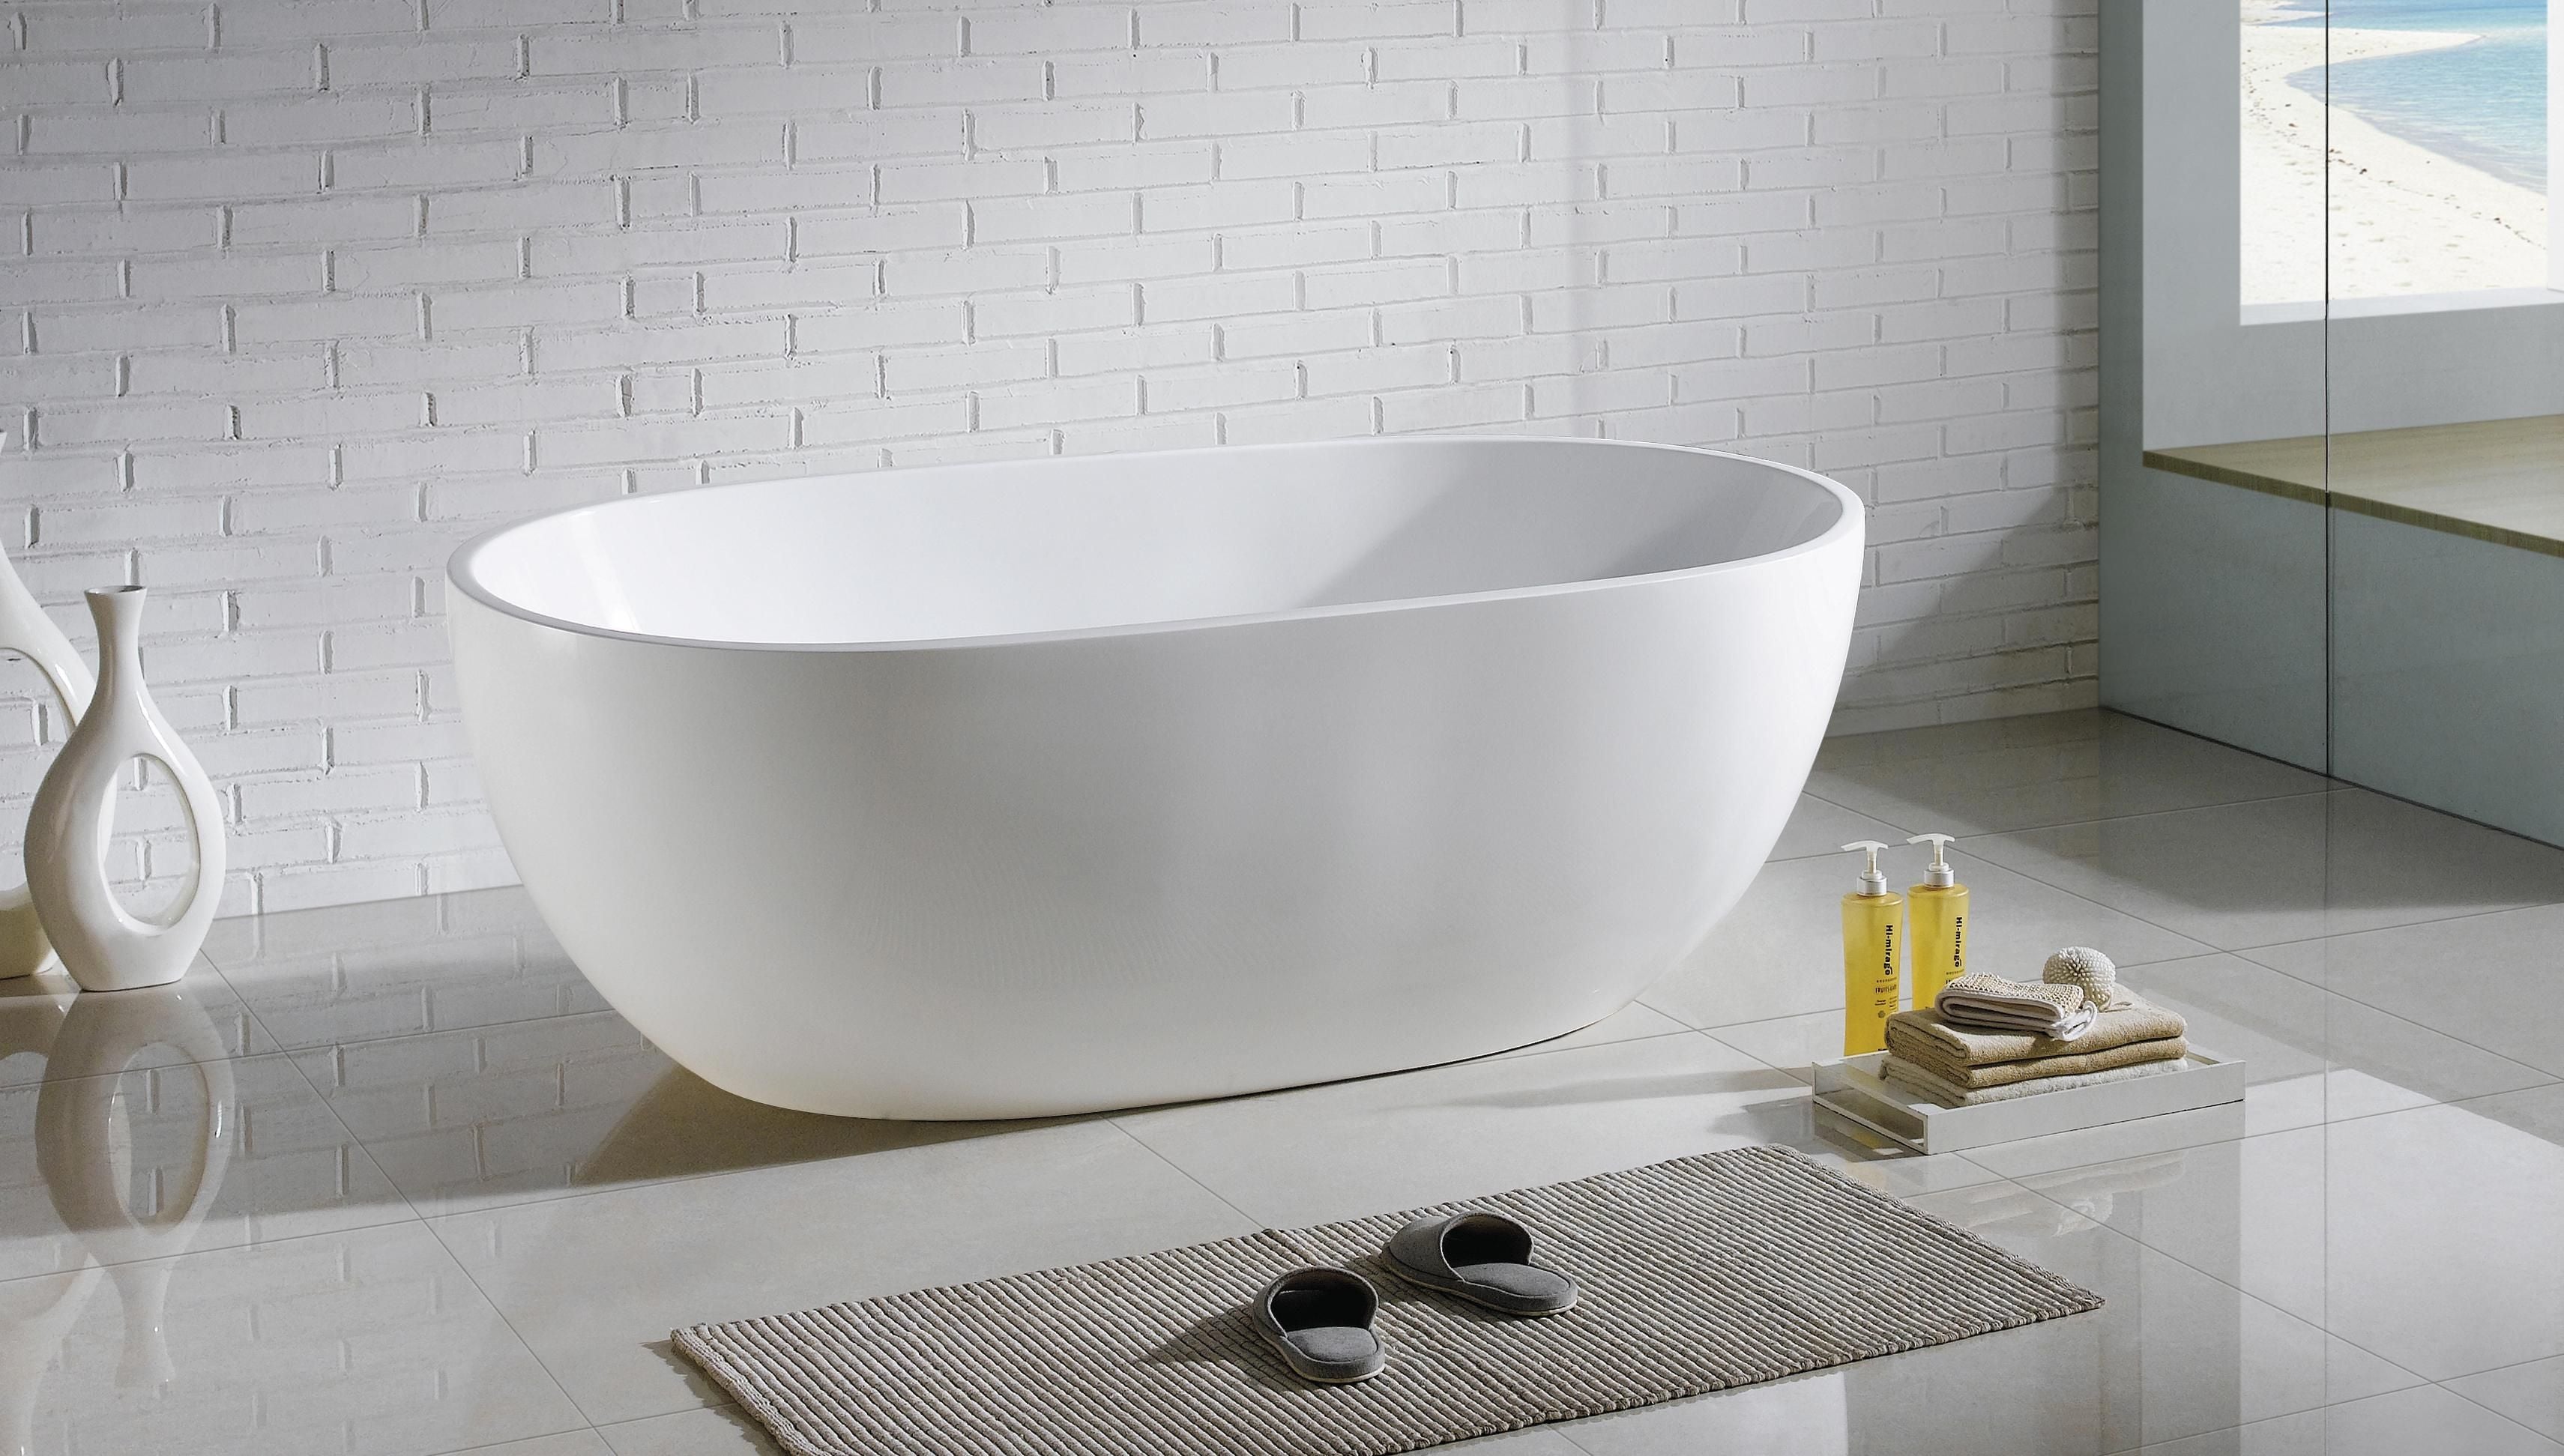 POSEIDON OLIVIA FREE STANDING BATHTUB GLOSS WHITE (AVAILABLE IN 1000MM, 1300MM ,1530MM AND 1690MM)